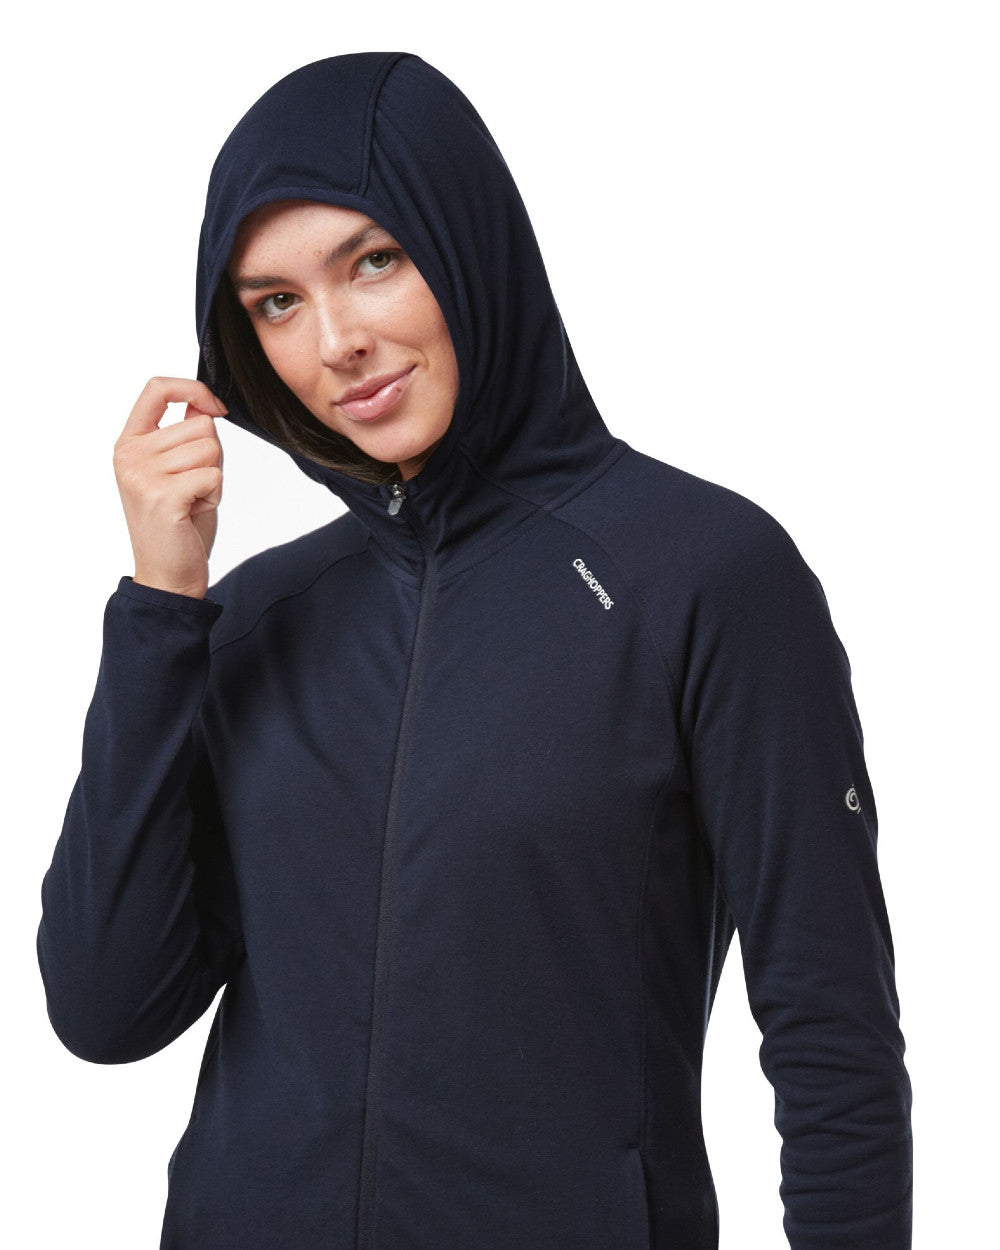 Blue Navy Coloured Craghoppers NosiLife Nilo Ladies Hooded Top On A White Background 